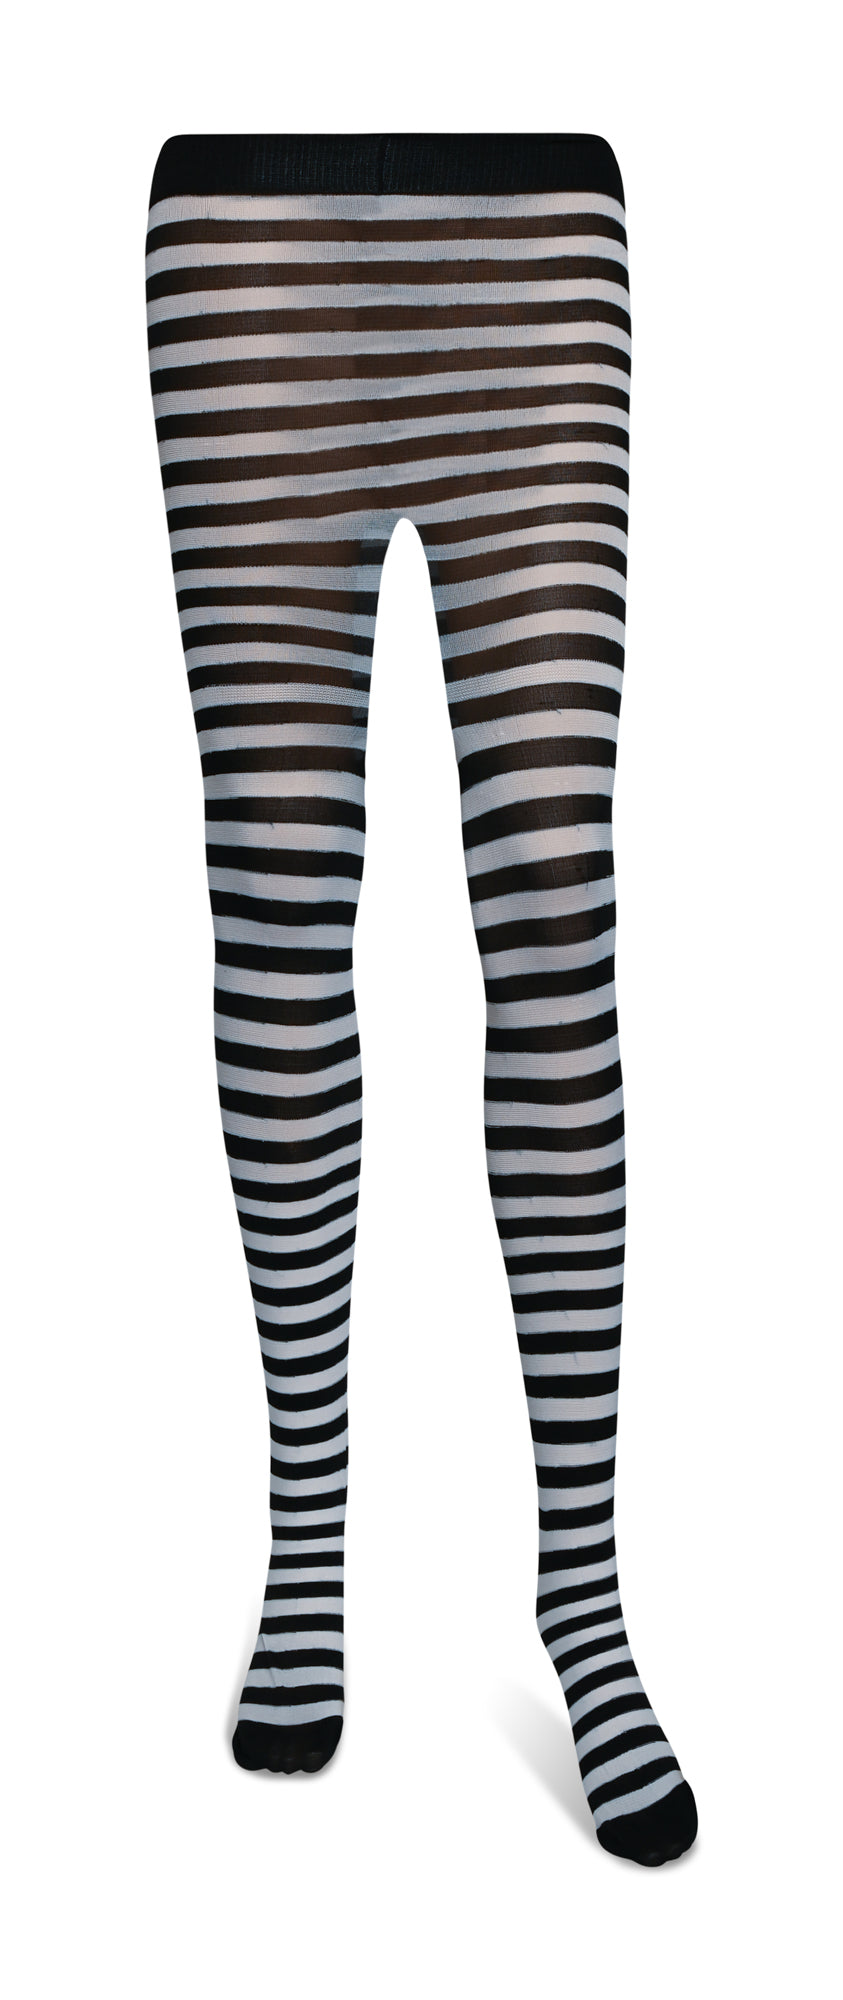 Black and White Tights - Striped Nylon Stretch Pantyhose Stocking Acce